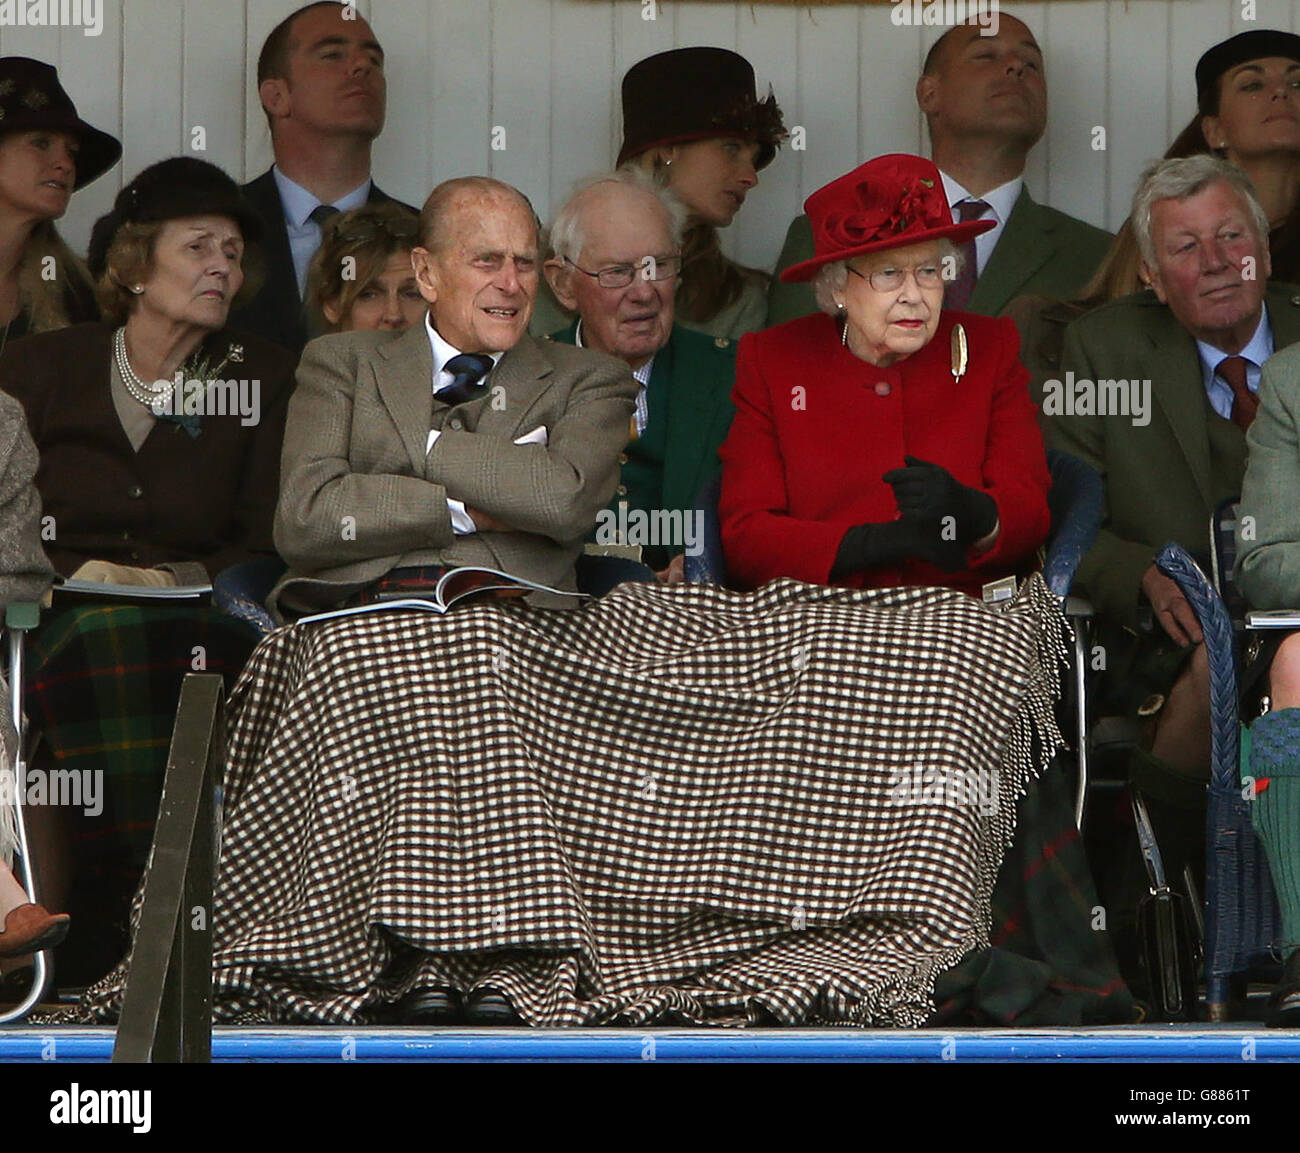 The Duke of Edinburgh and The Games' patron Queen Elizabeth II during the Braemar Royal Highland Gathering held a short distance from the royals' summer retreat at the Balmoral estate in Aberdeenshire. Stock Photo